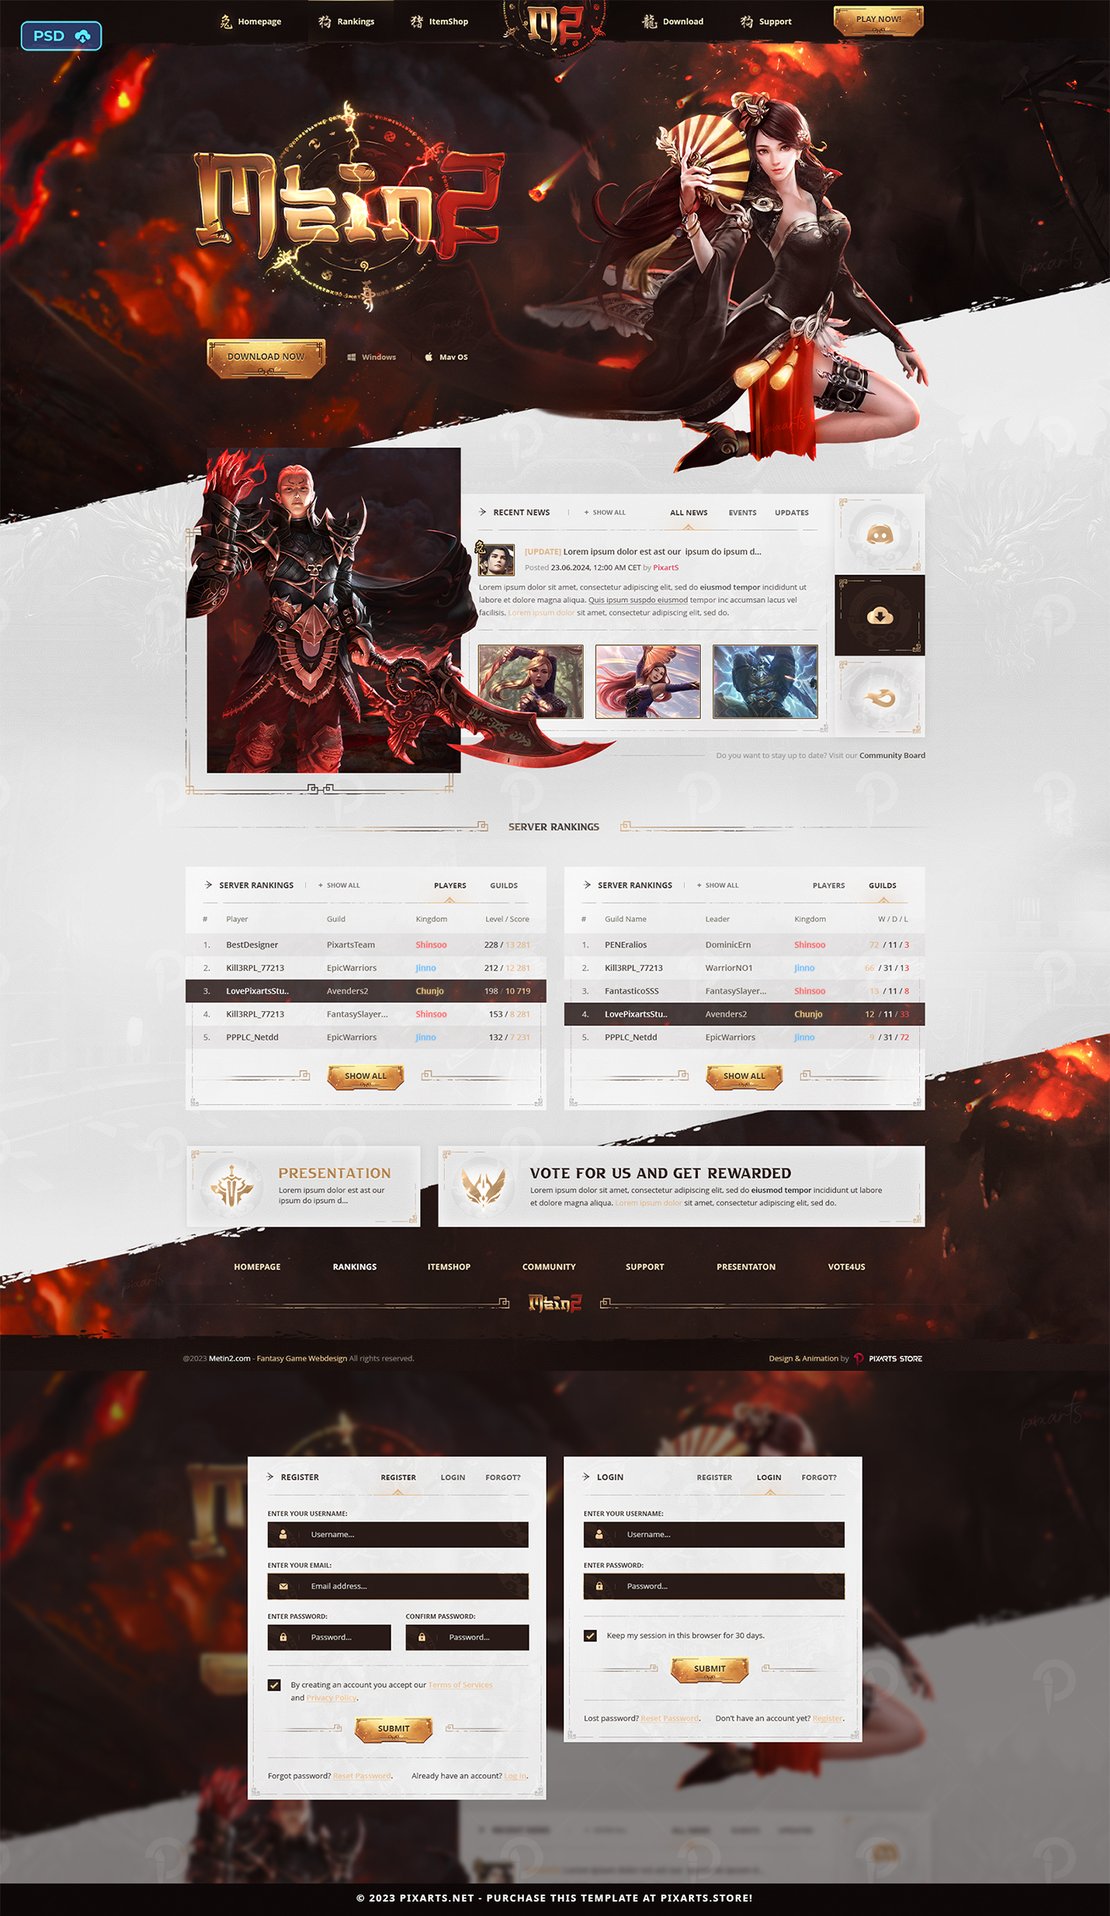 Chinese Metin2 Game Website Template - M2World